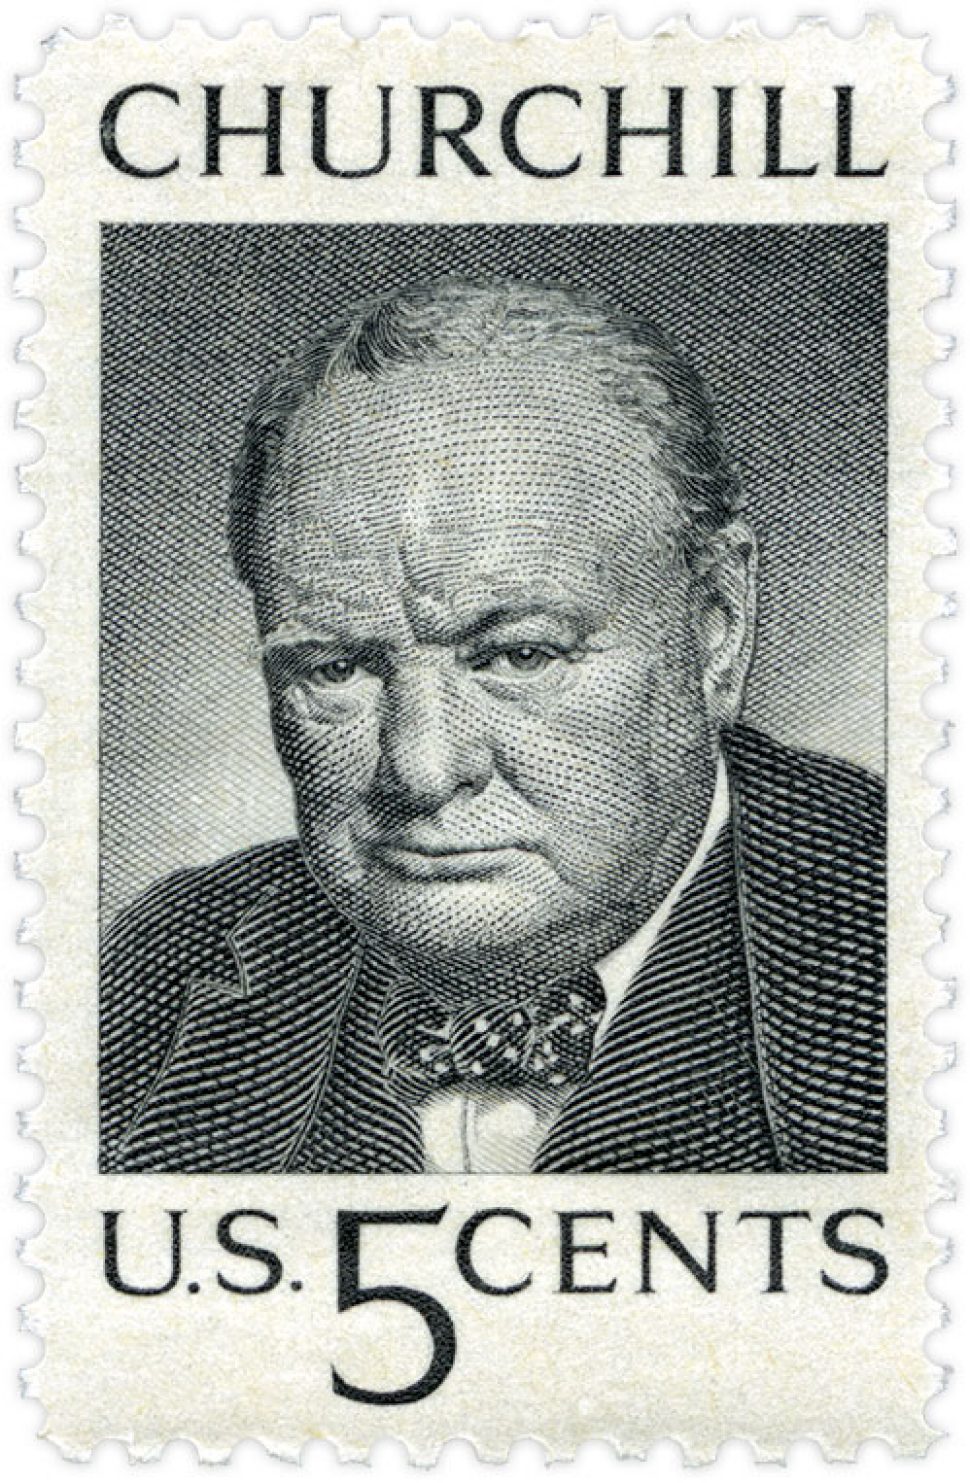 5 cent stamp showing Winston Churchill - from 1965